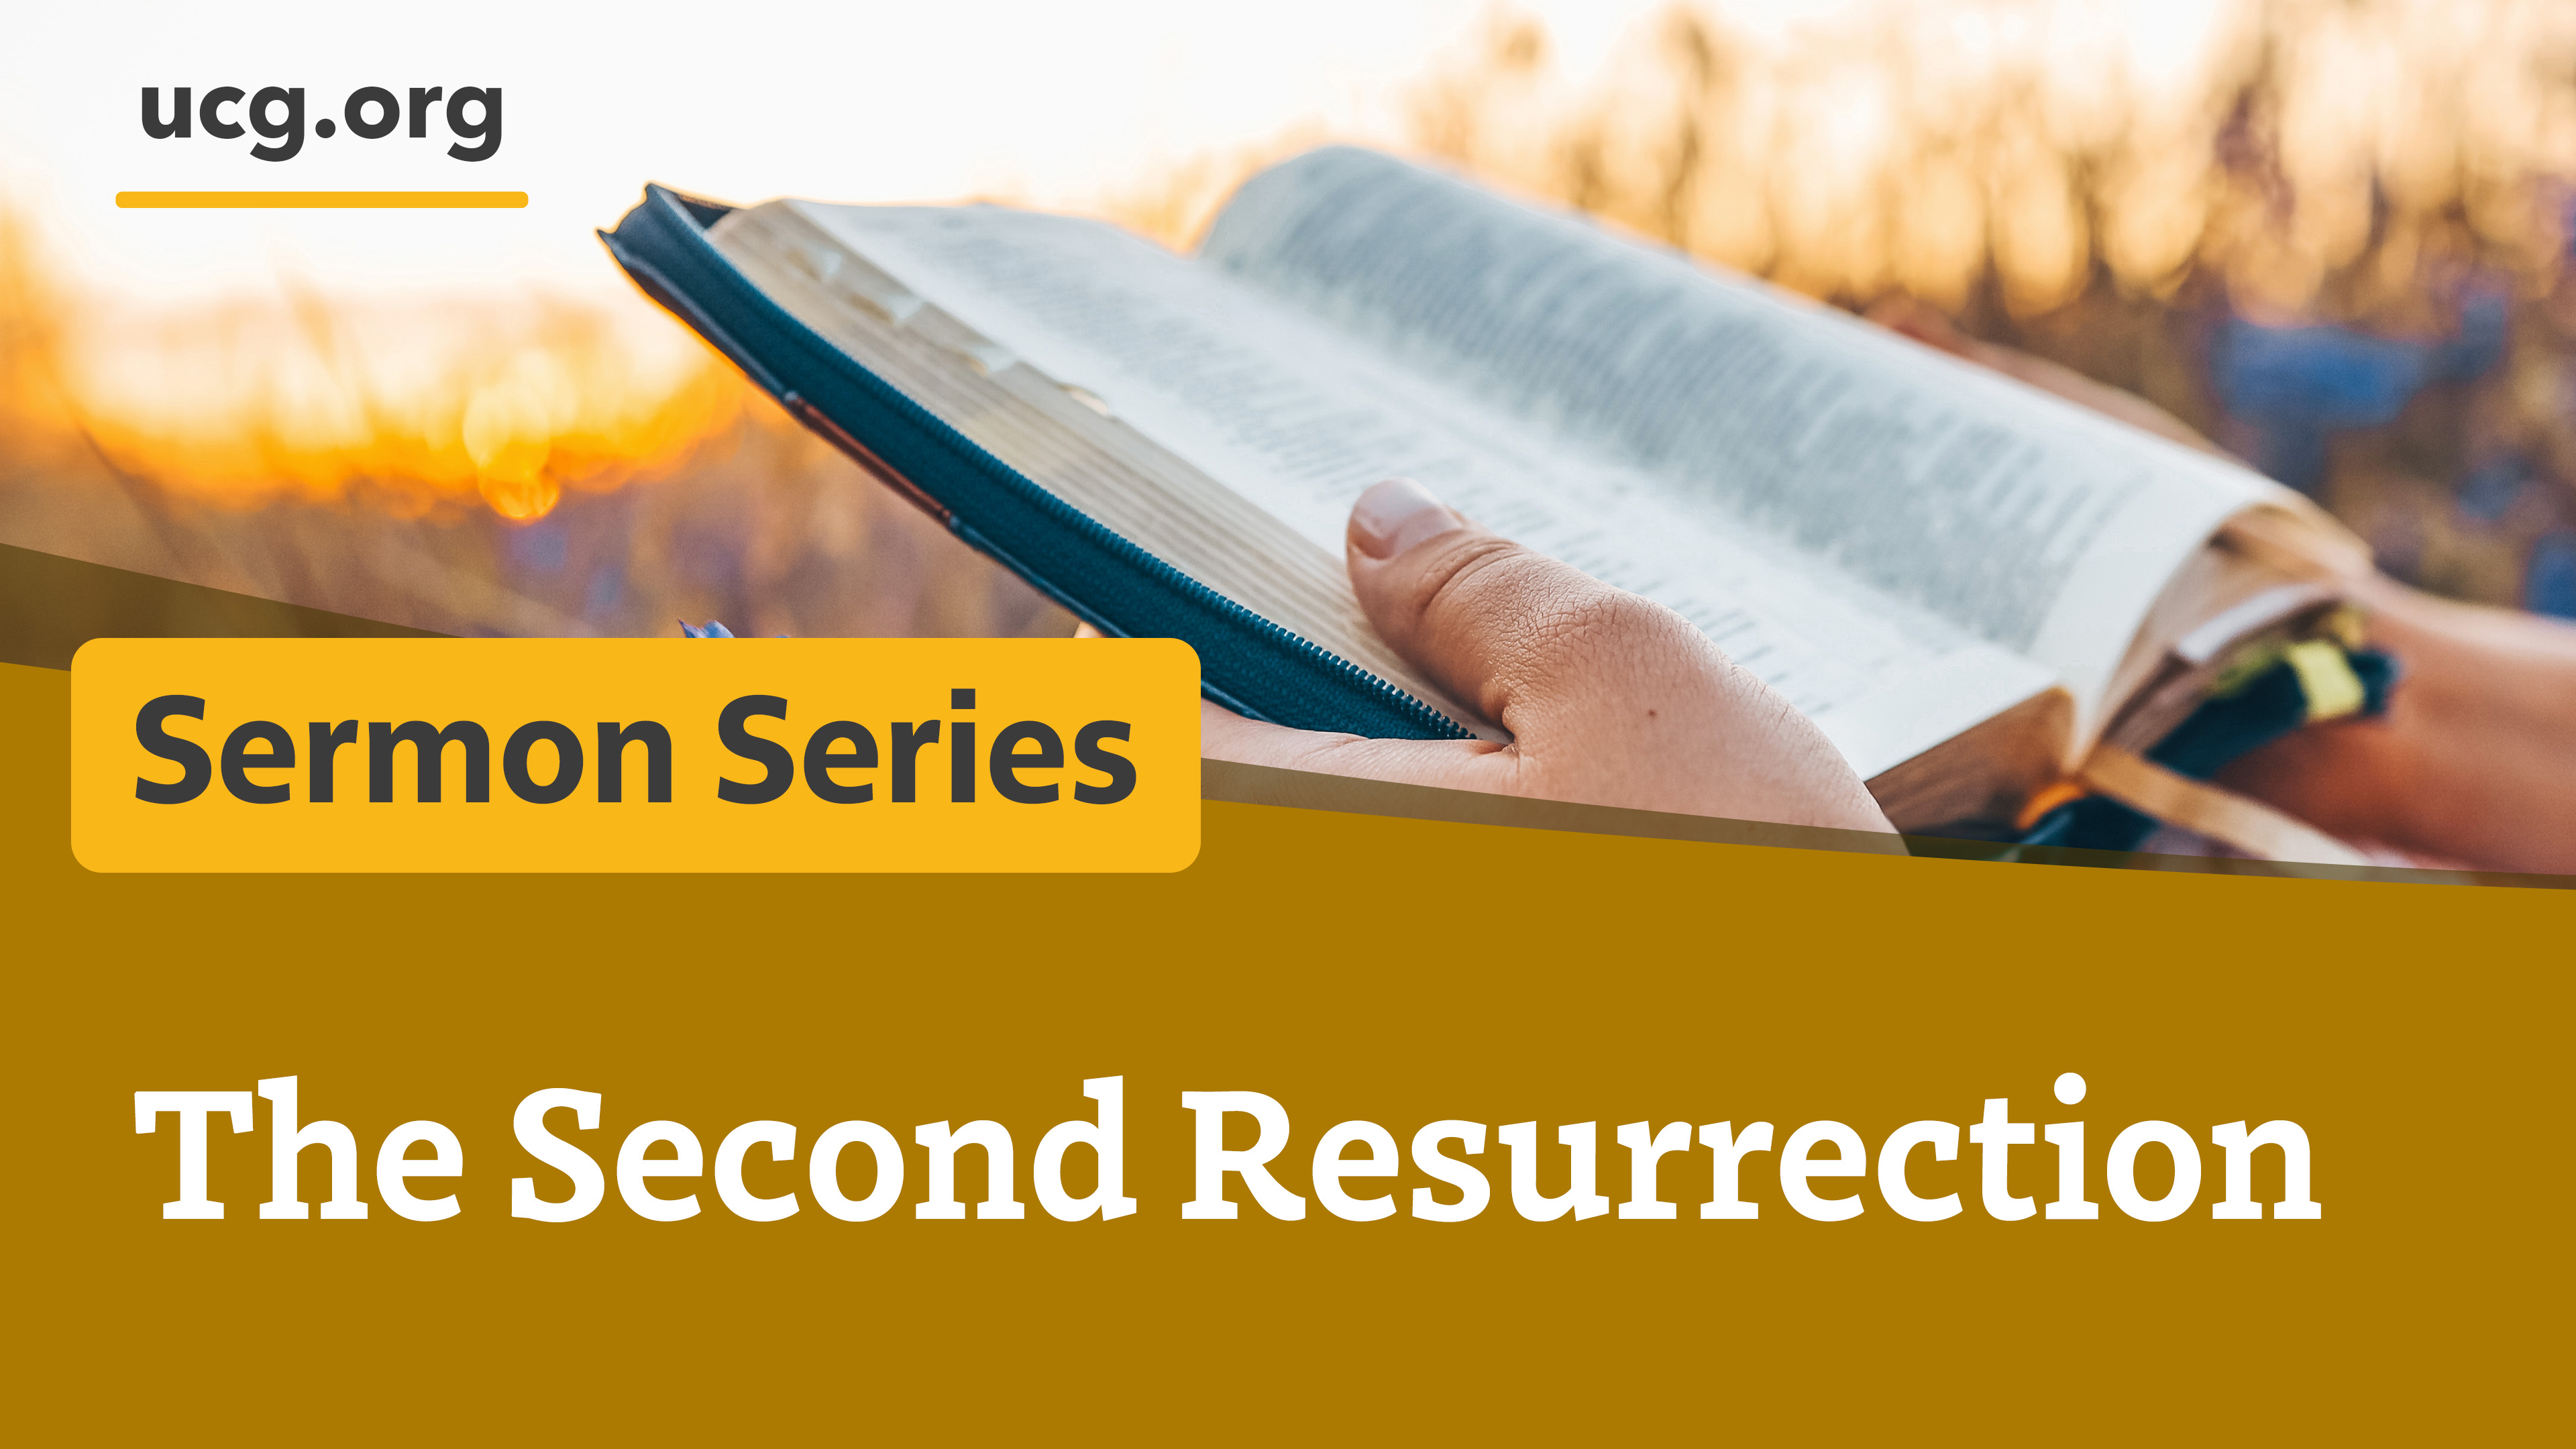 The Second Resurrection series